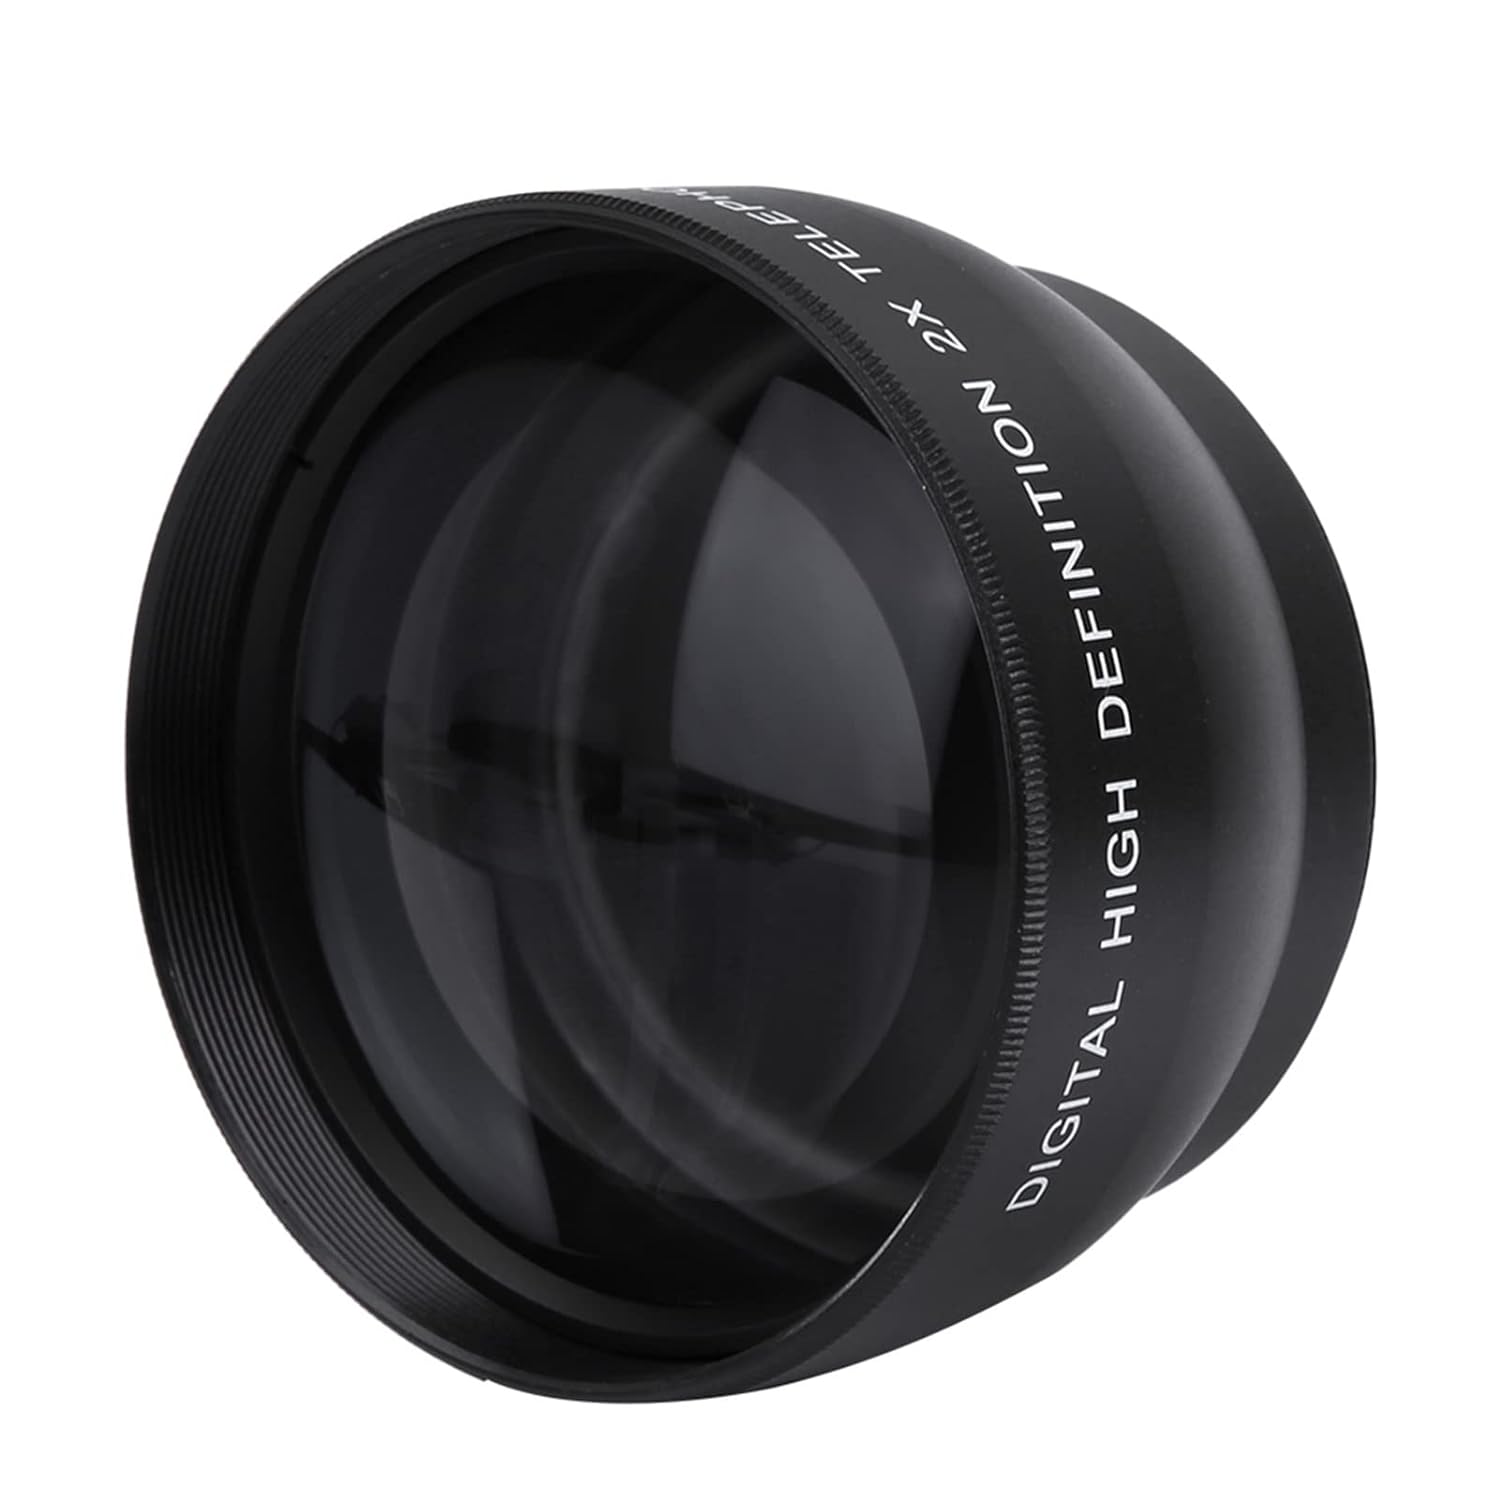 52mm telephoto lens52mm 2X mag,Lens,52mm 2X Magnification HD Tele Converter Telephoto Lens for 52mm Mount Camera